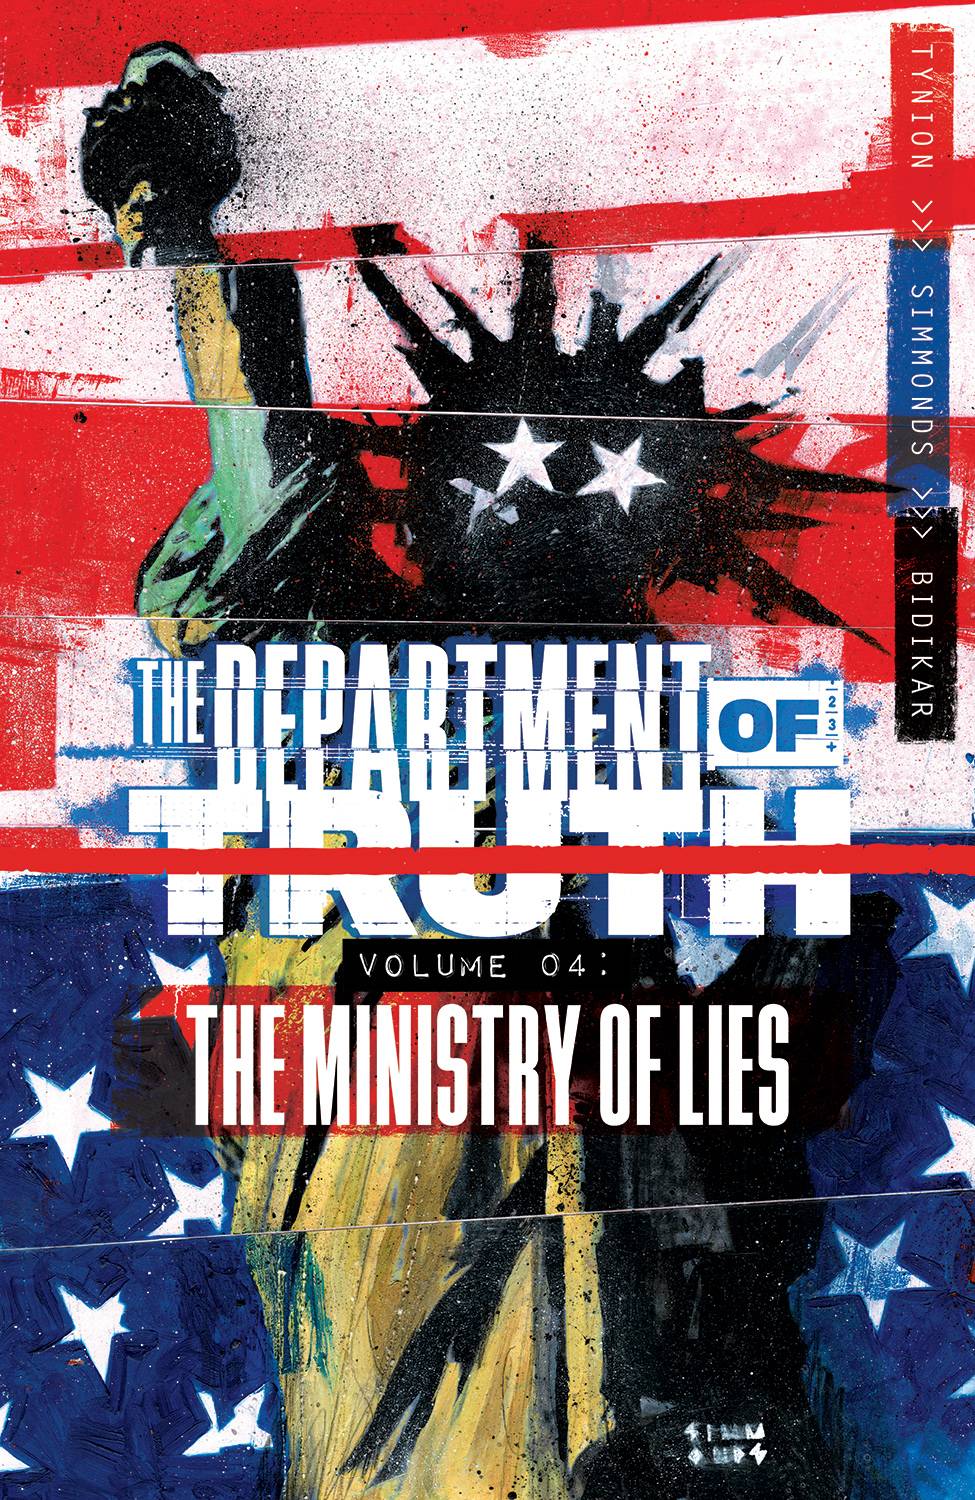 The Department Of Truth vol 4: The Minstery Of Lies s/c